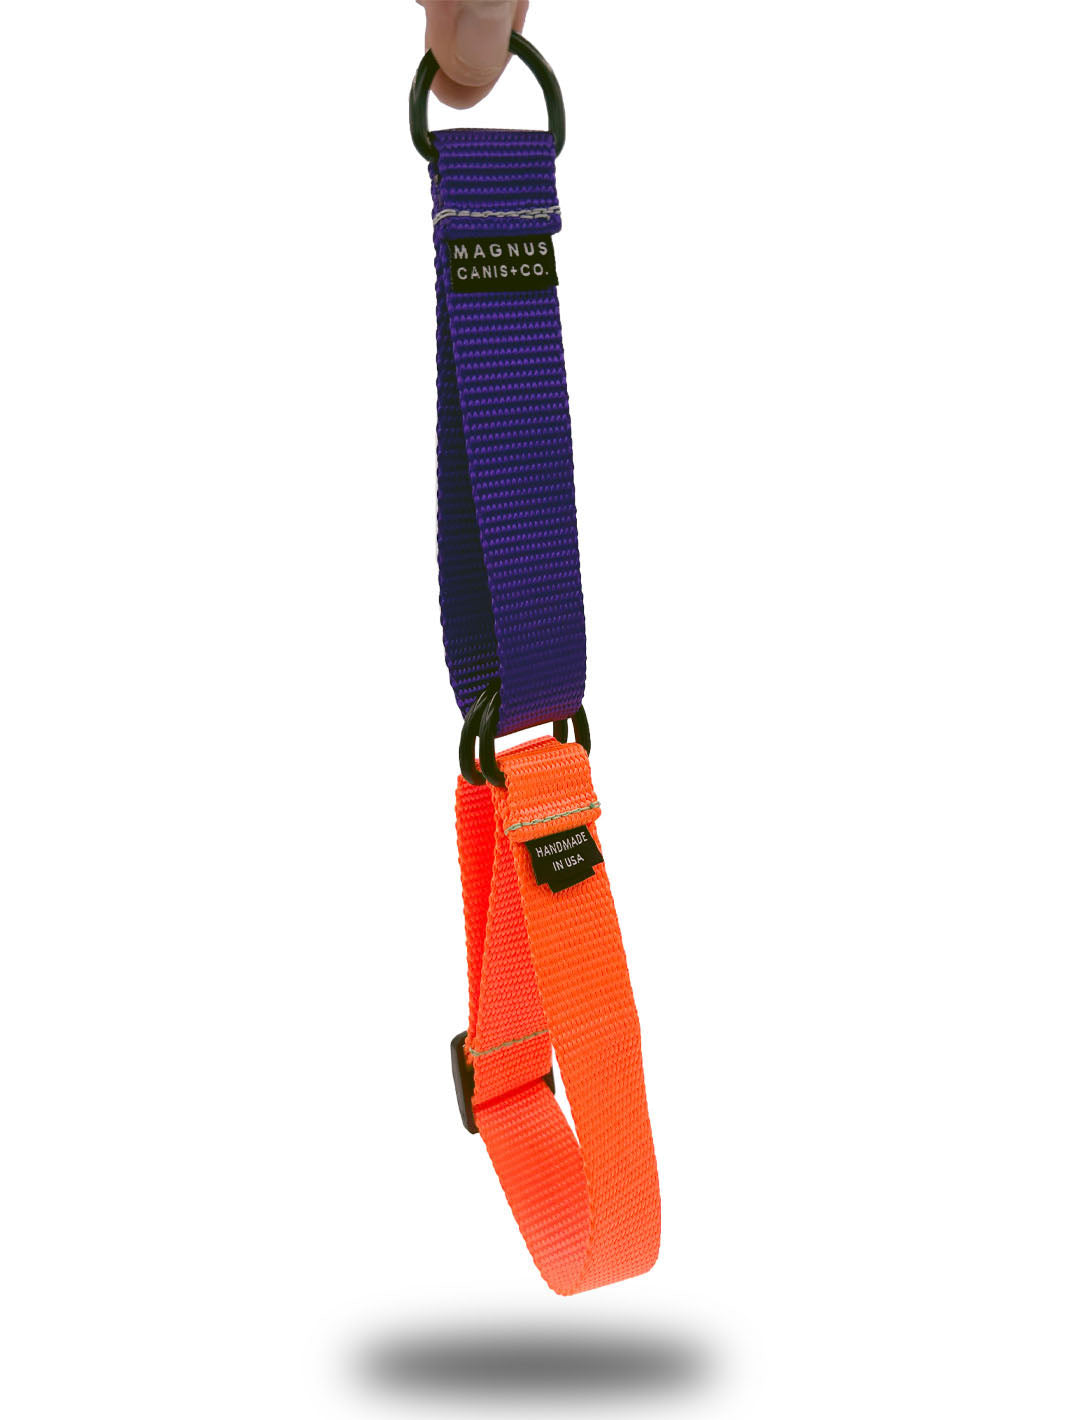 MAGNUS Canis martingale dog color made of nylon strap webbing in orange and purple colors.